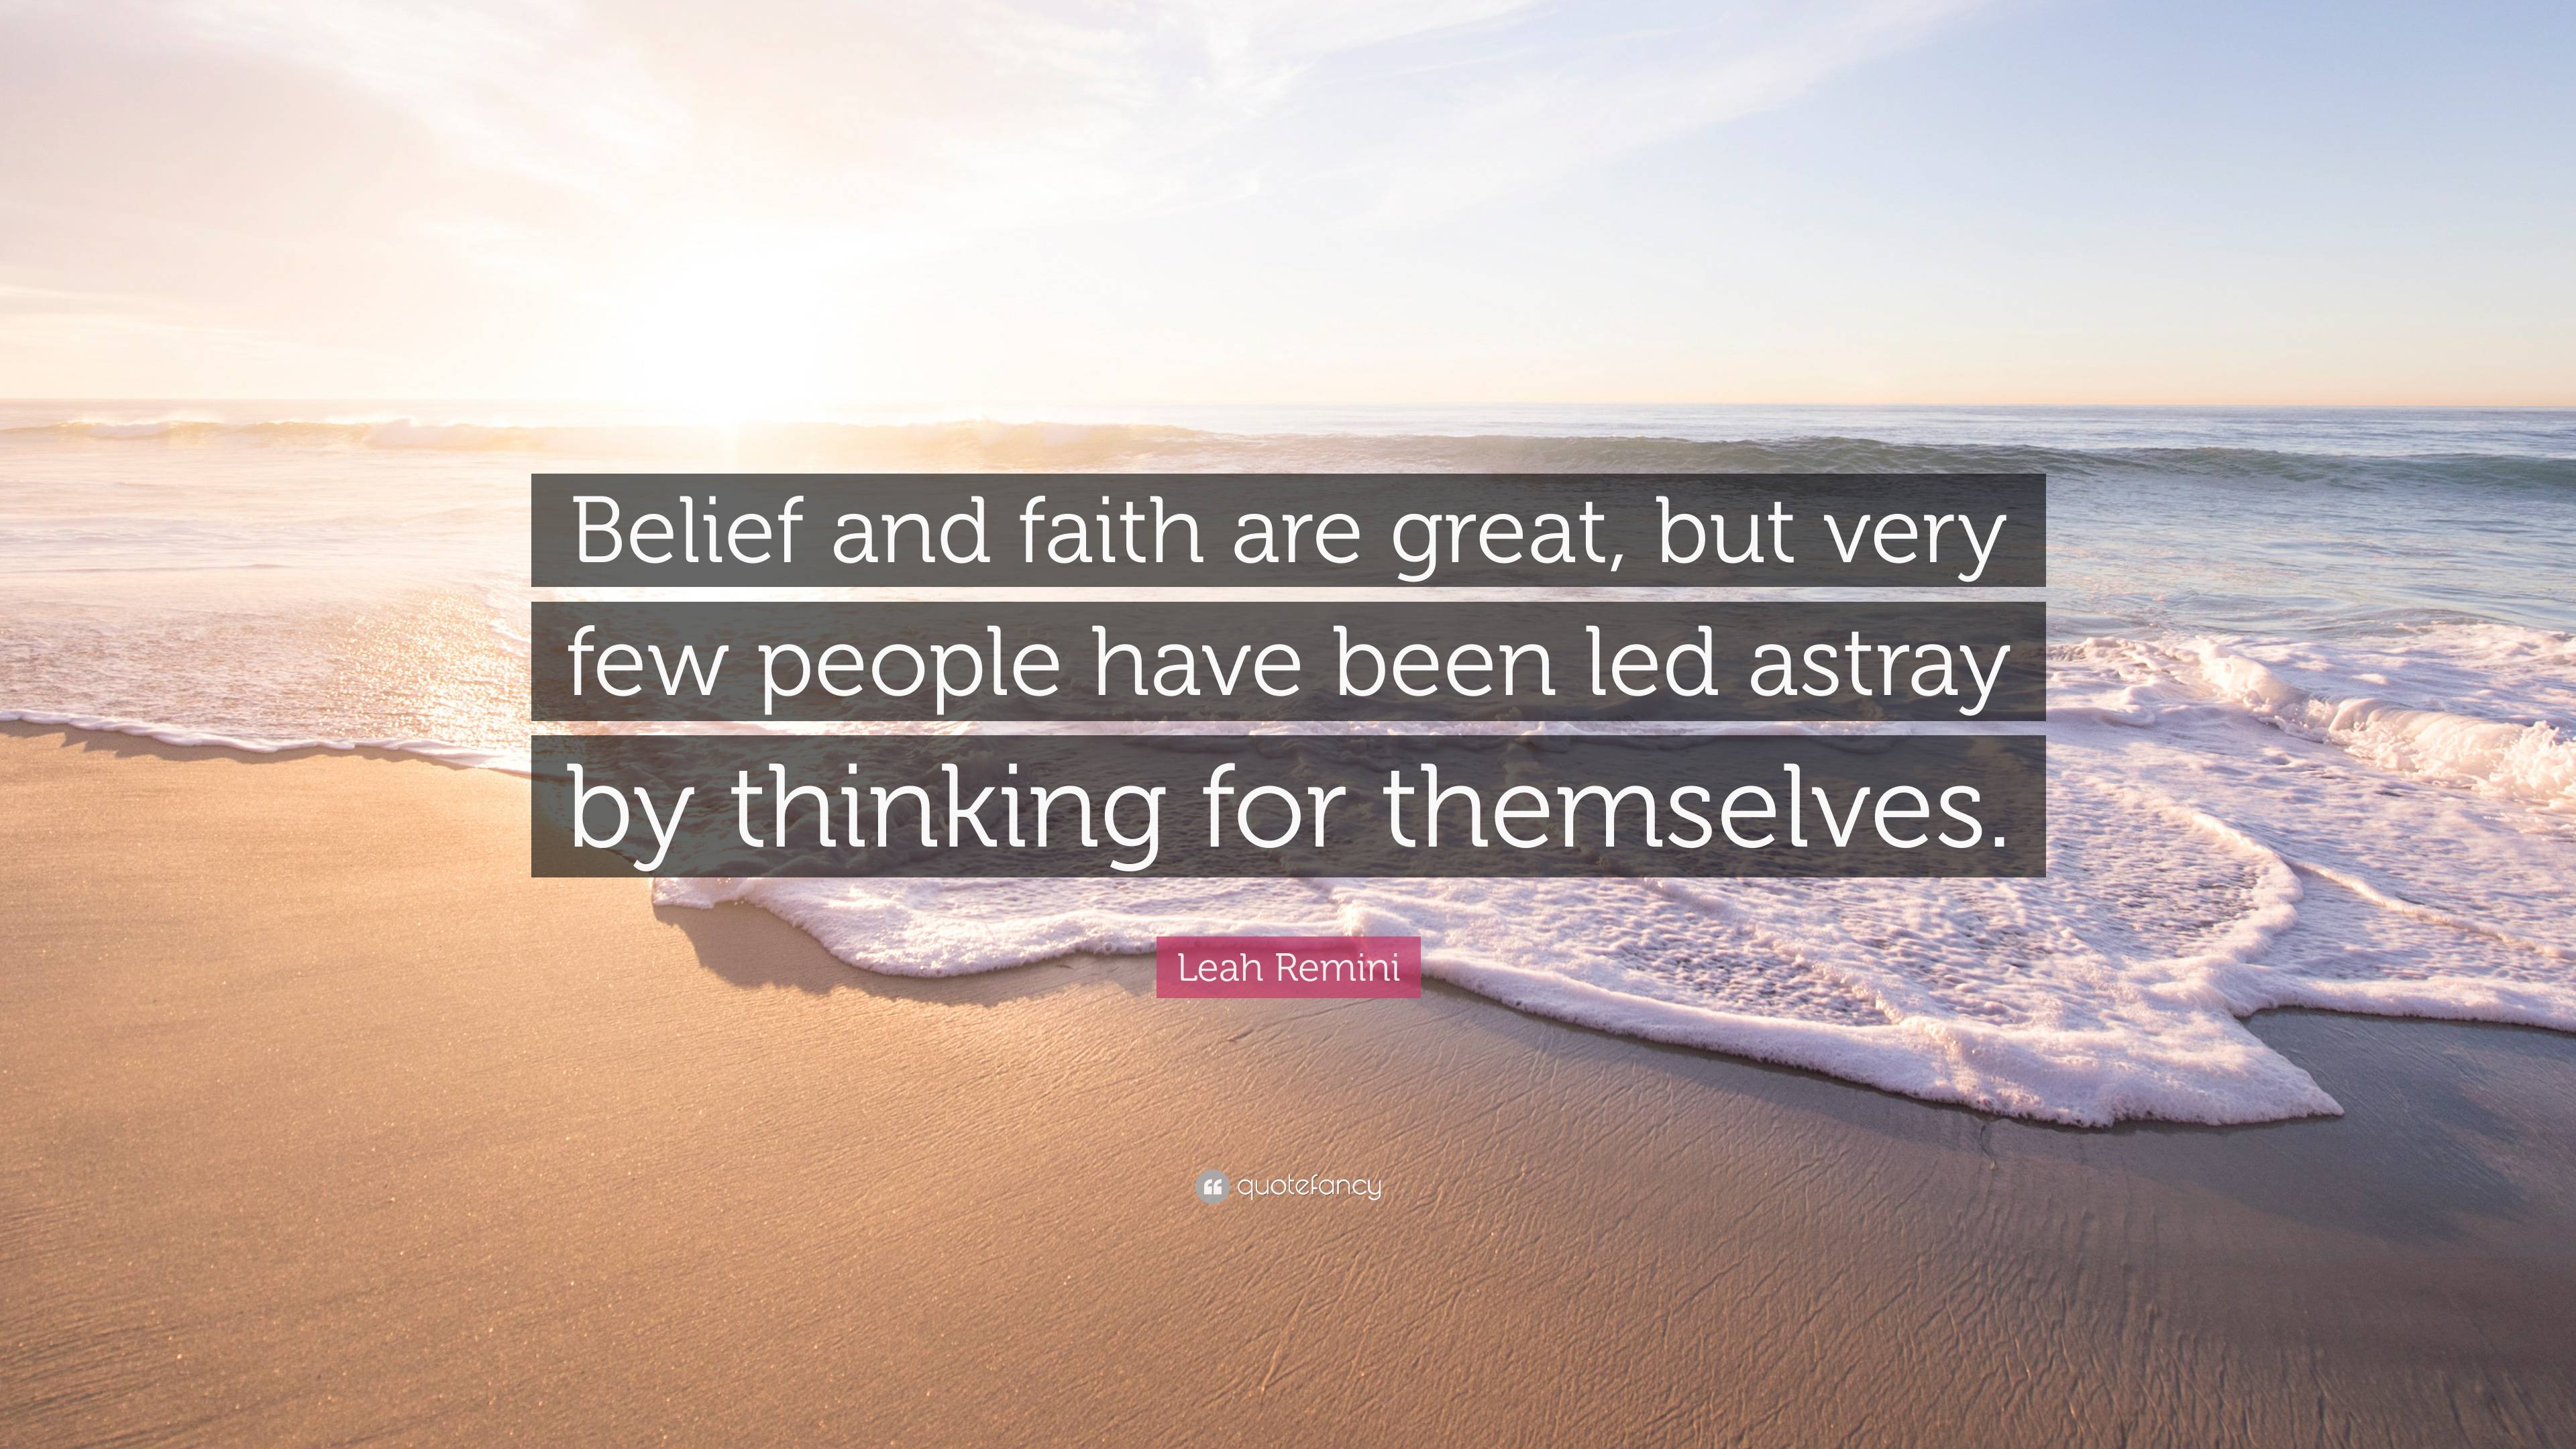 Leah Remini Quote: “Belief and faith are great, but very few people ...